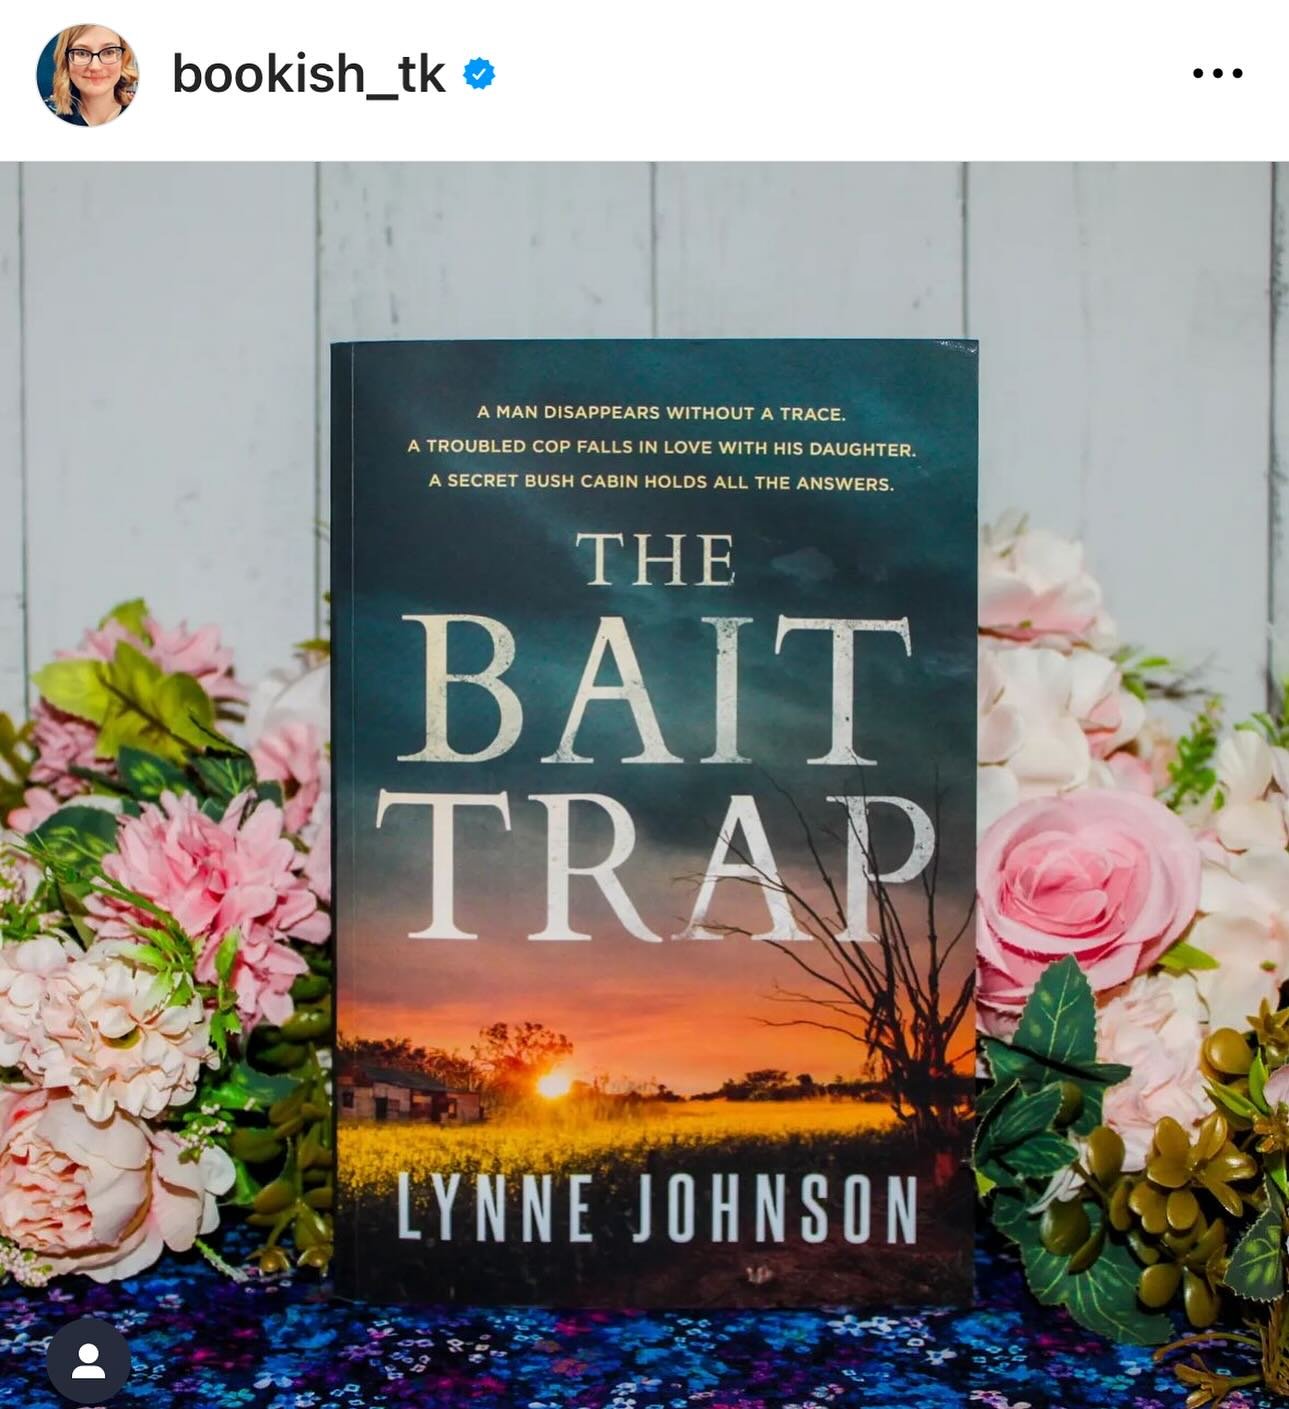 This excellent review by @bookish_tk really made my day! A buddy read with @allbookedout_with_mj 📚&lsquo;I did not see that ending coming at all&hellip;it had me wanting more.&rsquo;
#thebaittrap #lynnejohnsonauthor #aussiecrimefiction #crimethrille